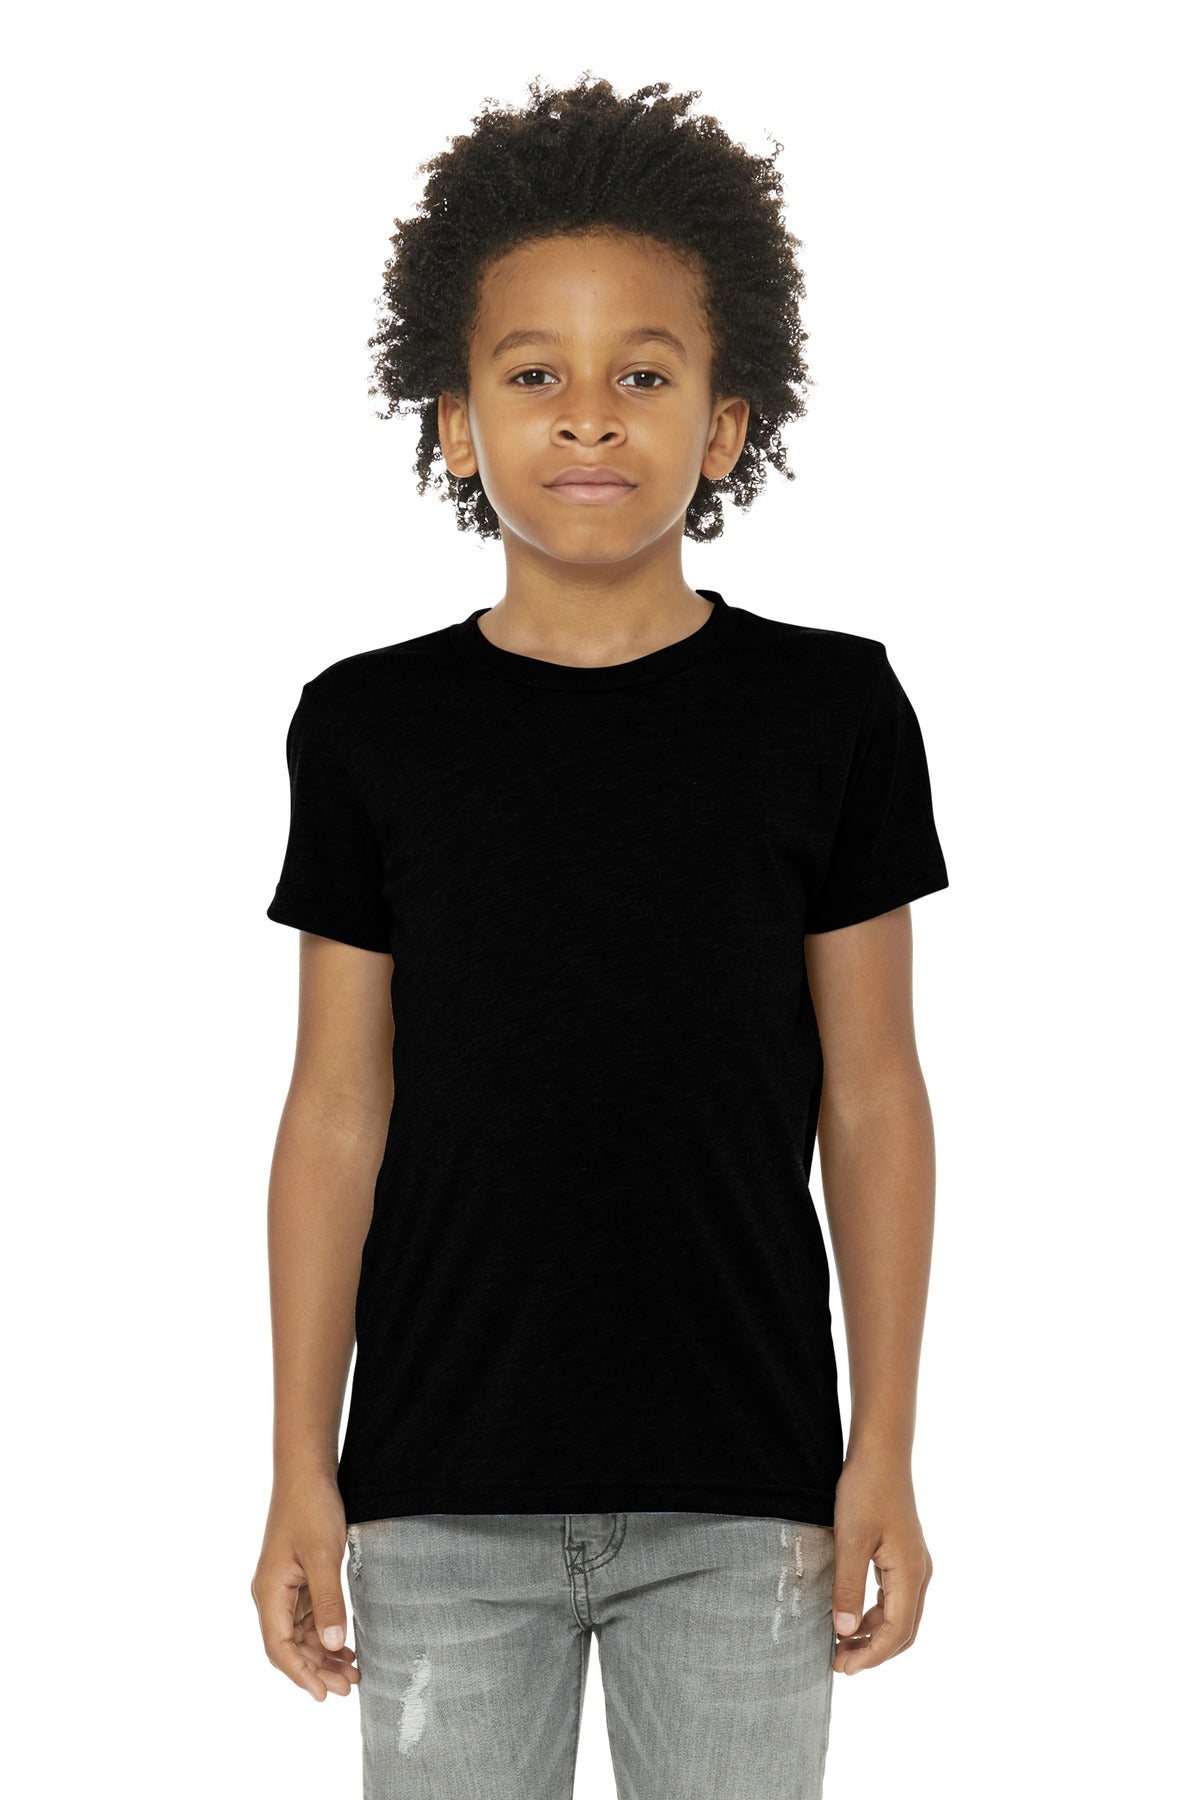 BELLA+CANVAS ® Youth Triblend Short Sleeve Tee. BC3413Y